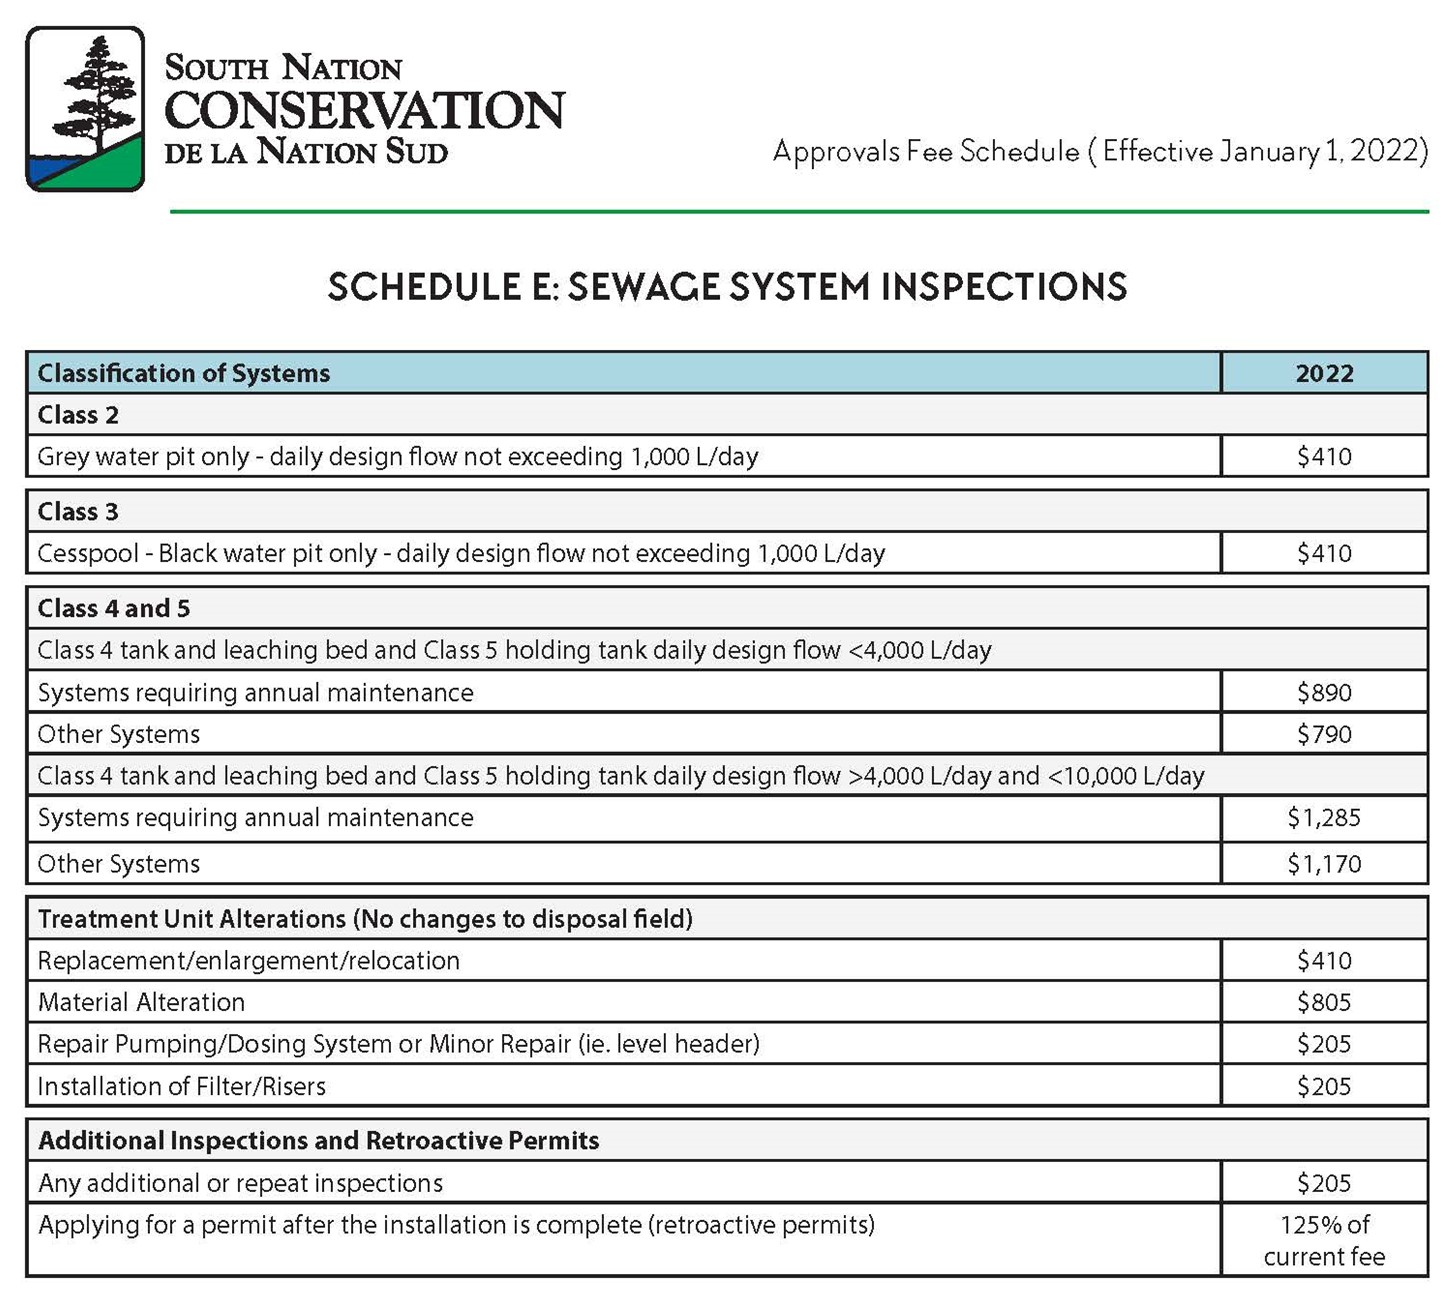 table showing schedule E: sewage system inspections